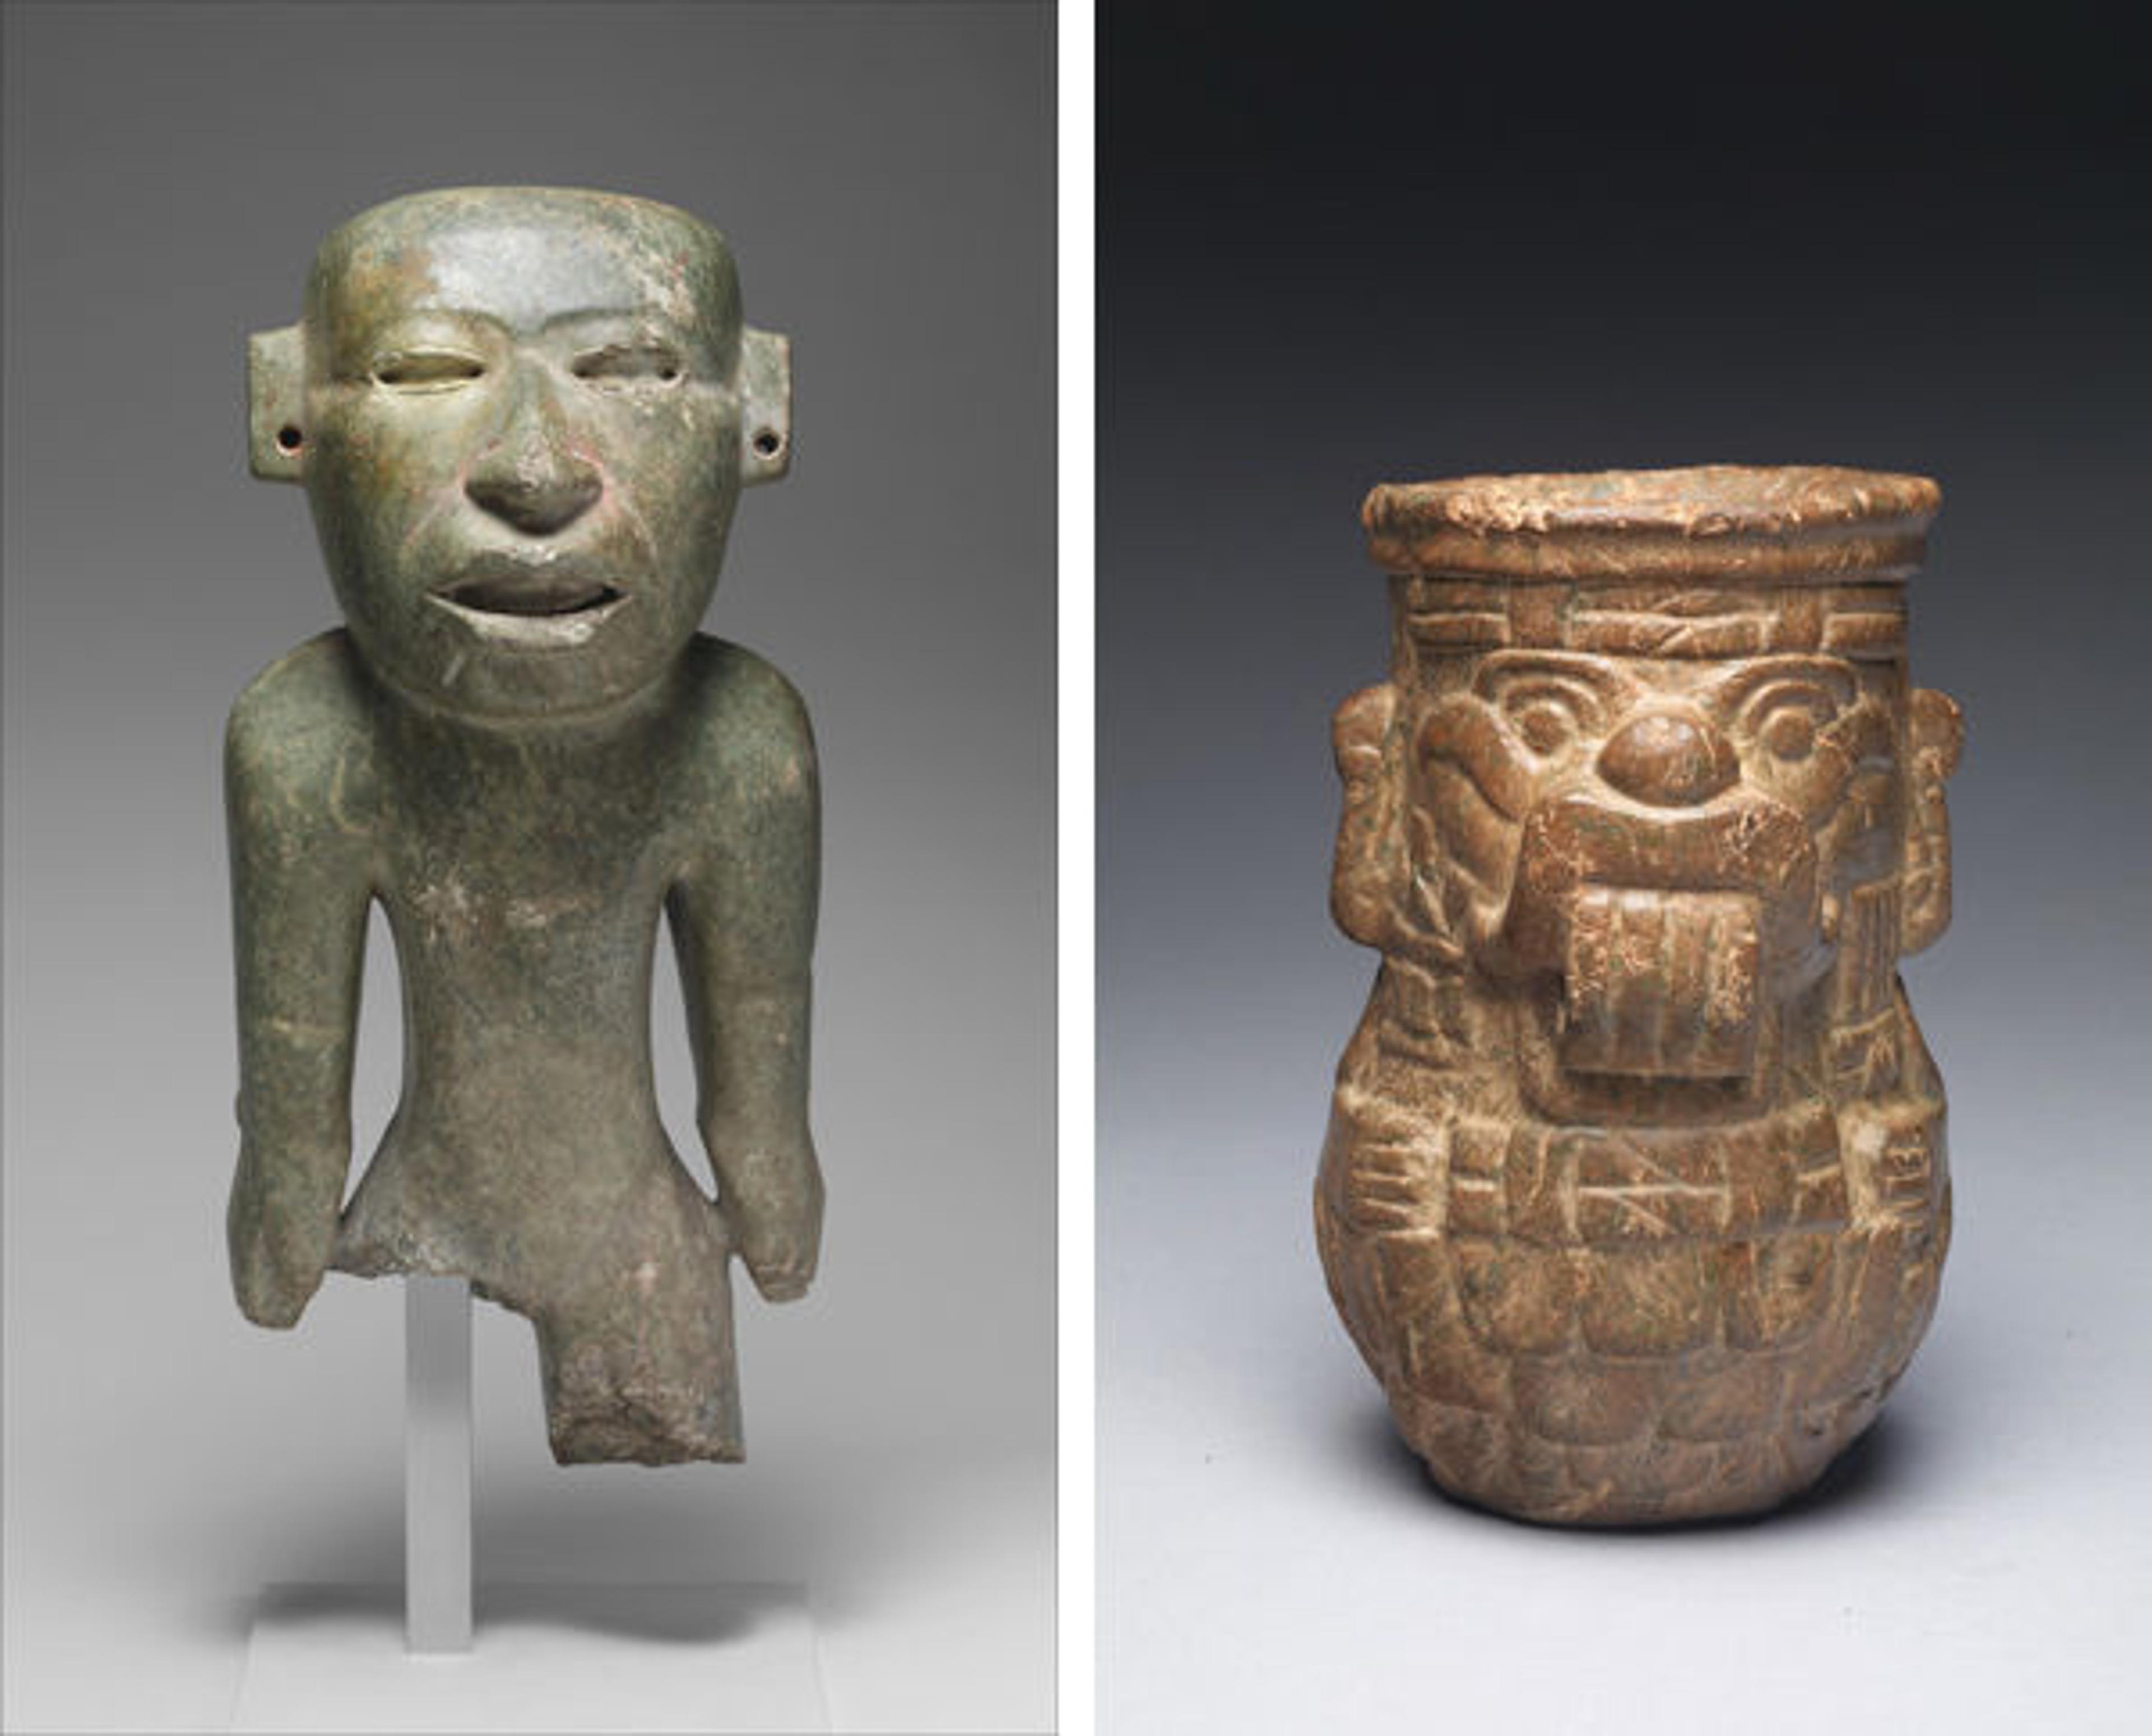 Left: Standing Figure, 3rd–7th century | Teotihuacan, Mexico, Mesoamerica | 1979.206.585 | Right: Storm God Vessel, 3rd–7th century | Teotihuacan, Mexico, Mesoamerica | 2012.530.1